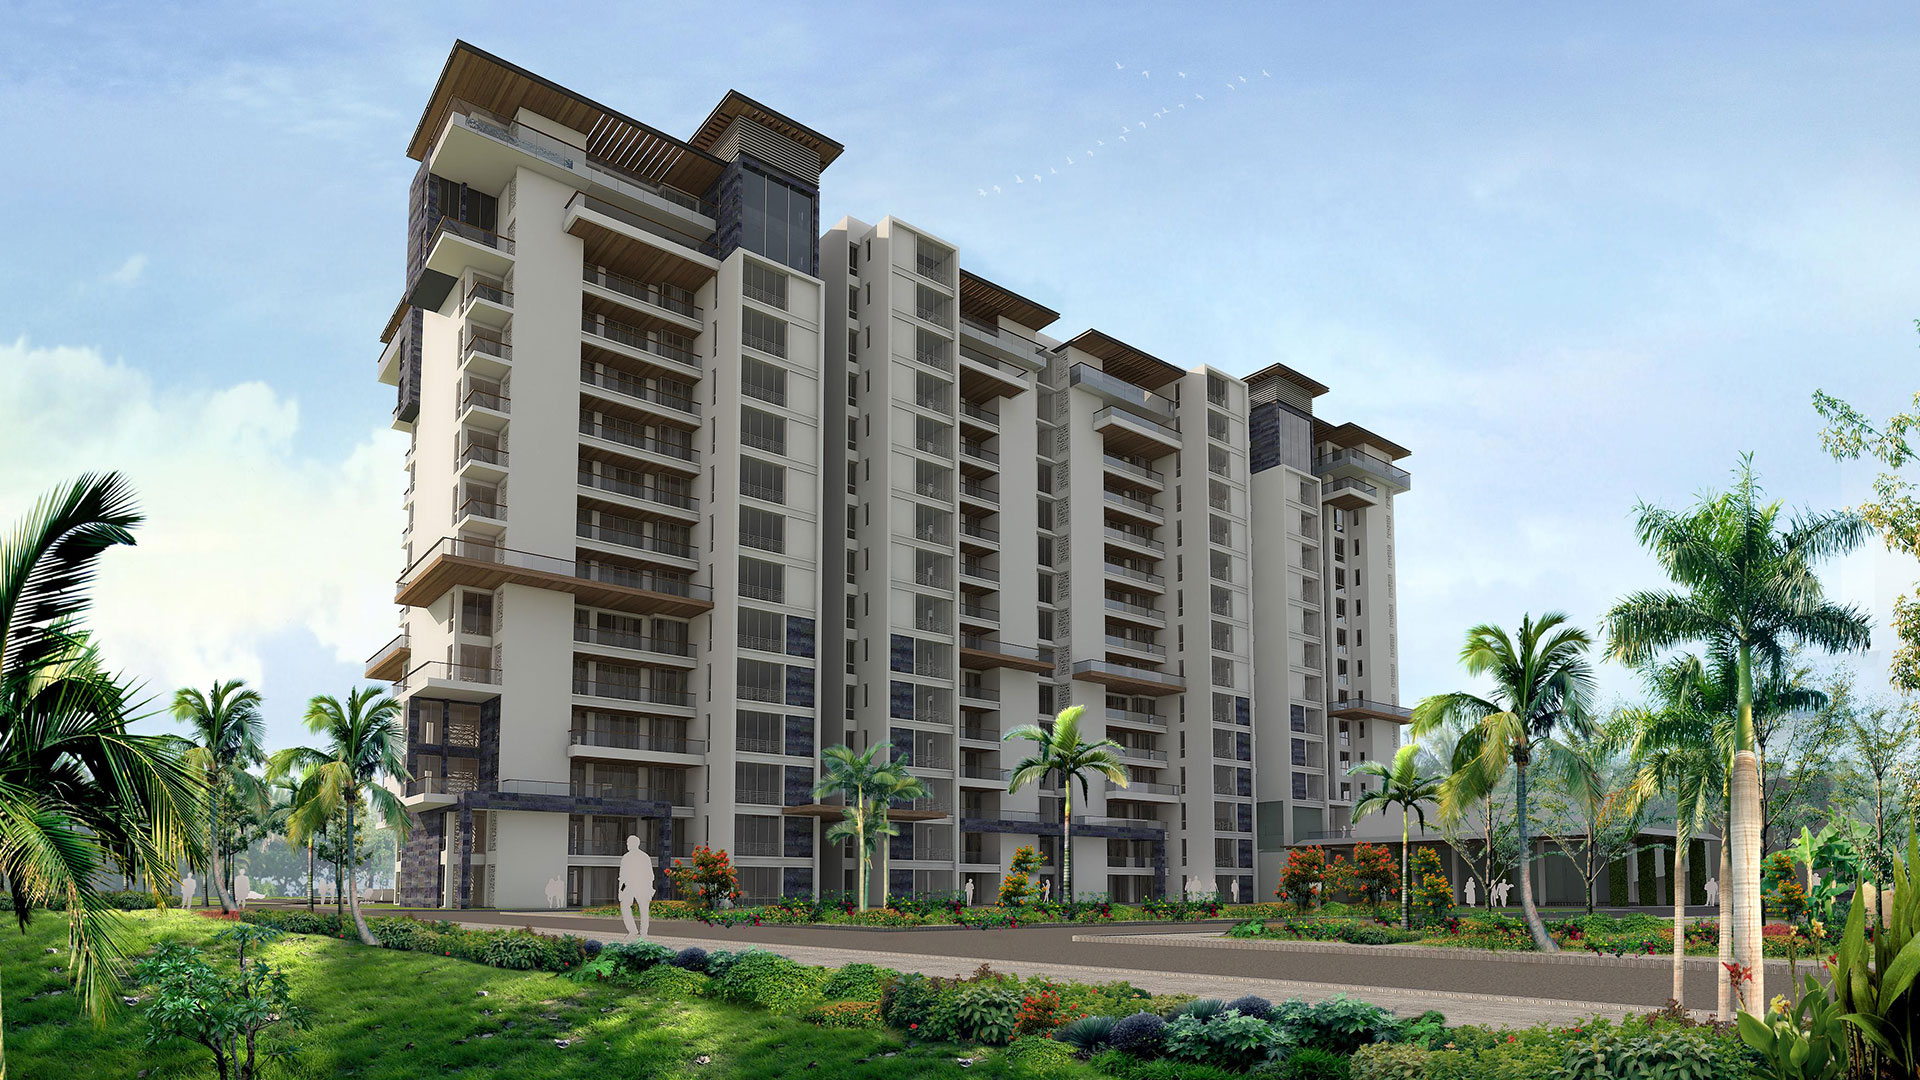 Divyashree introduces 3 Types of Linked Joint Family Home in Divyasree 77 Place